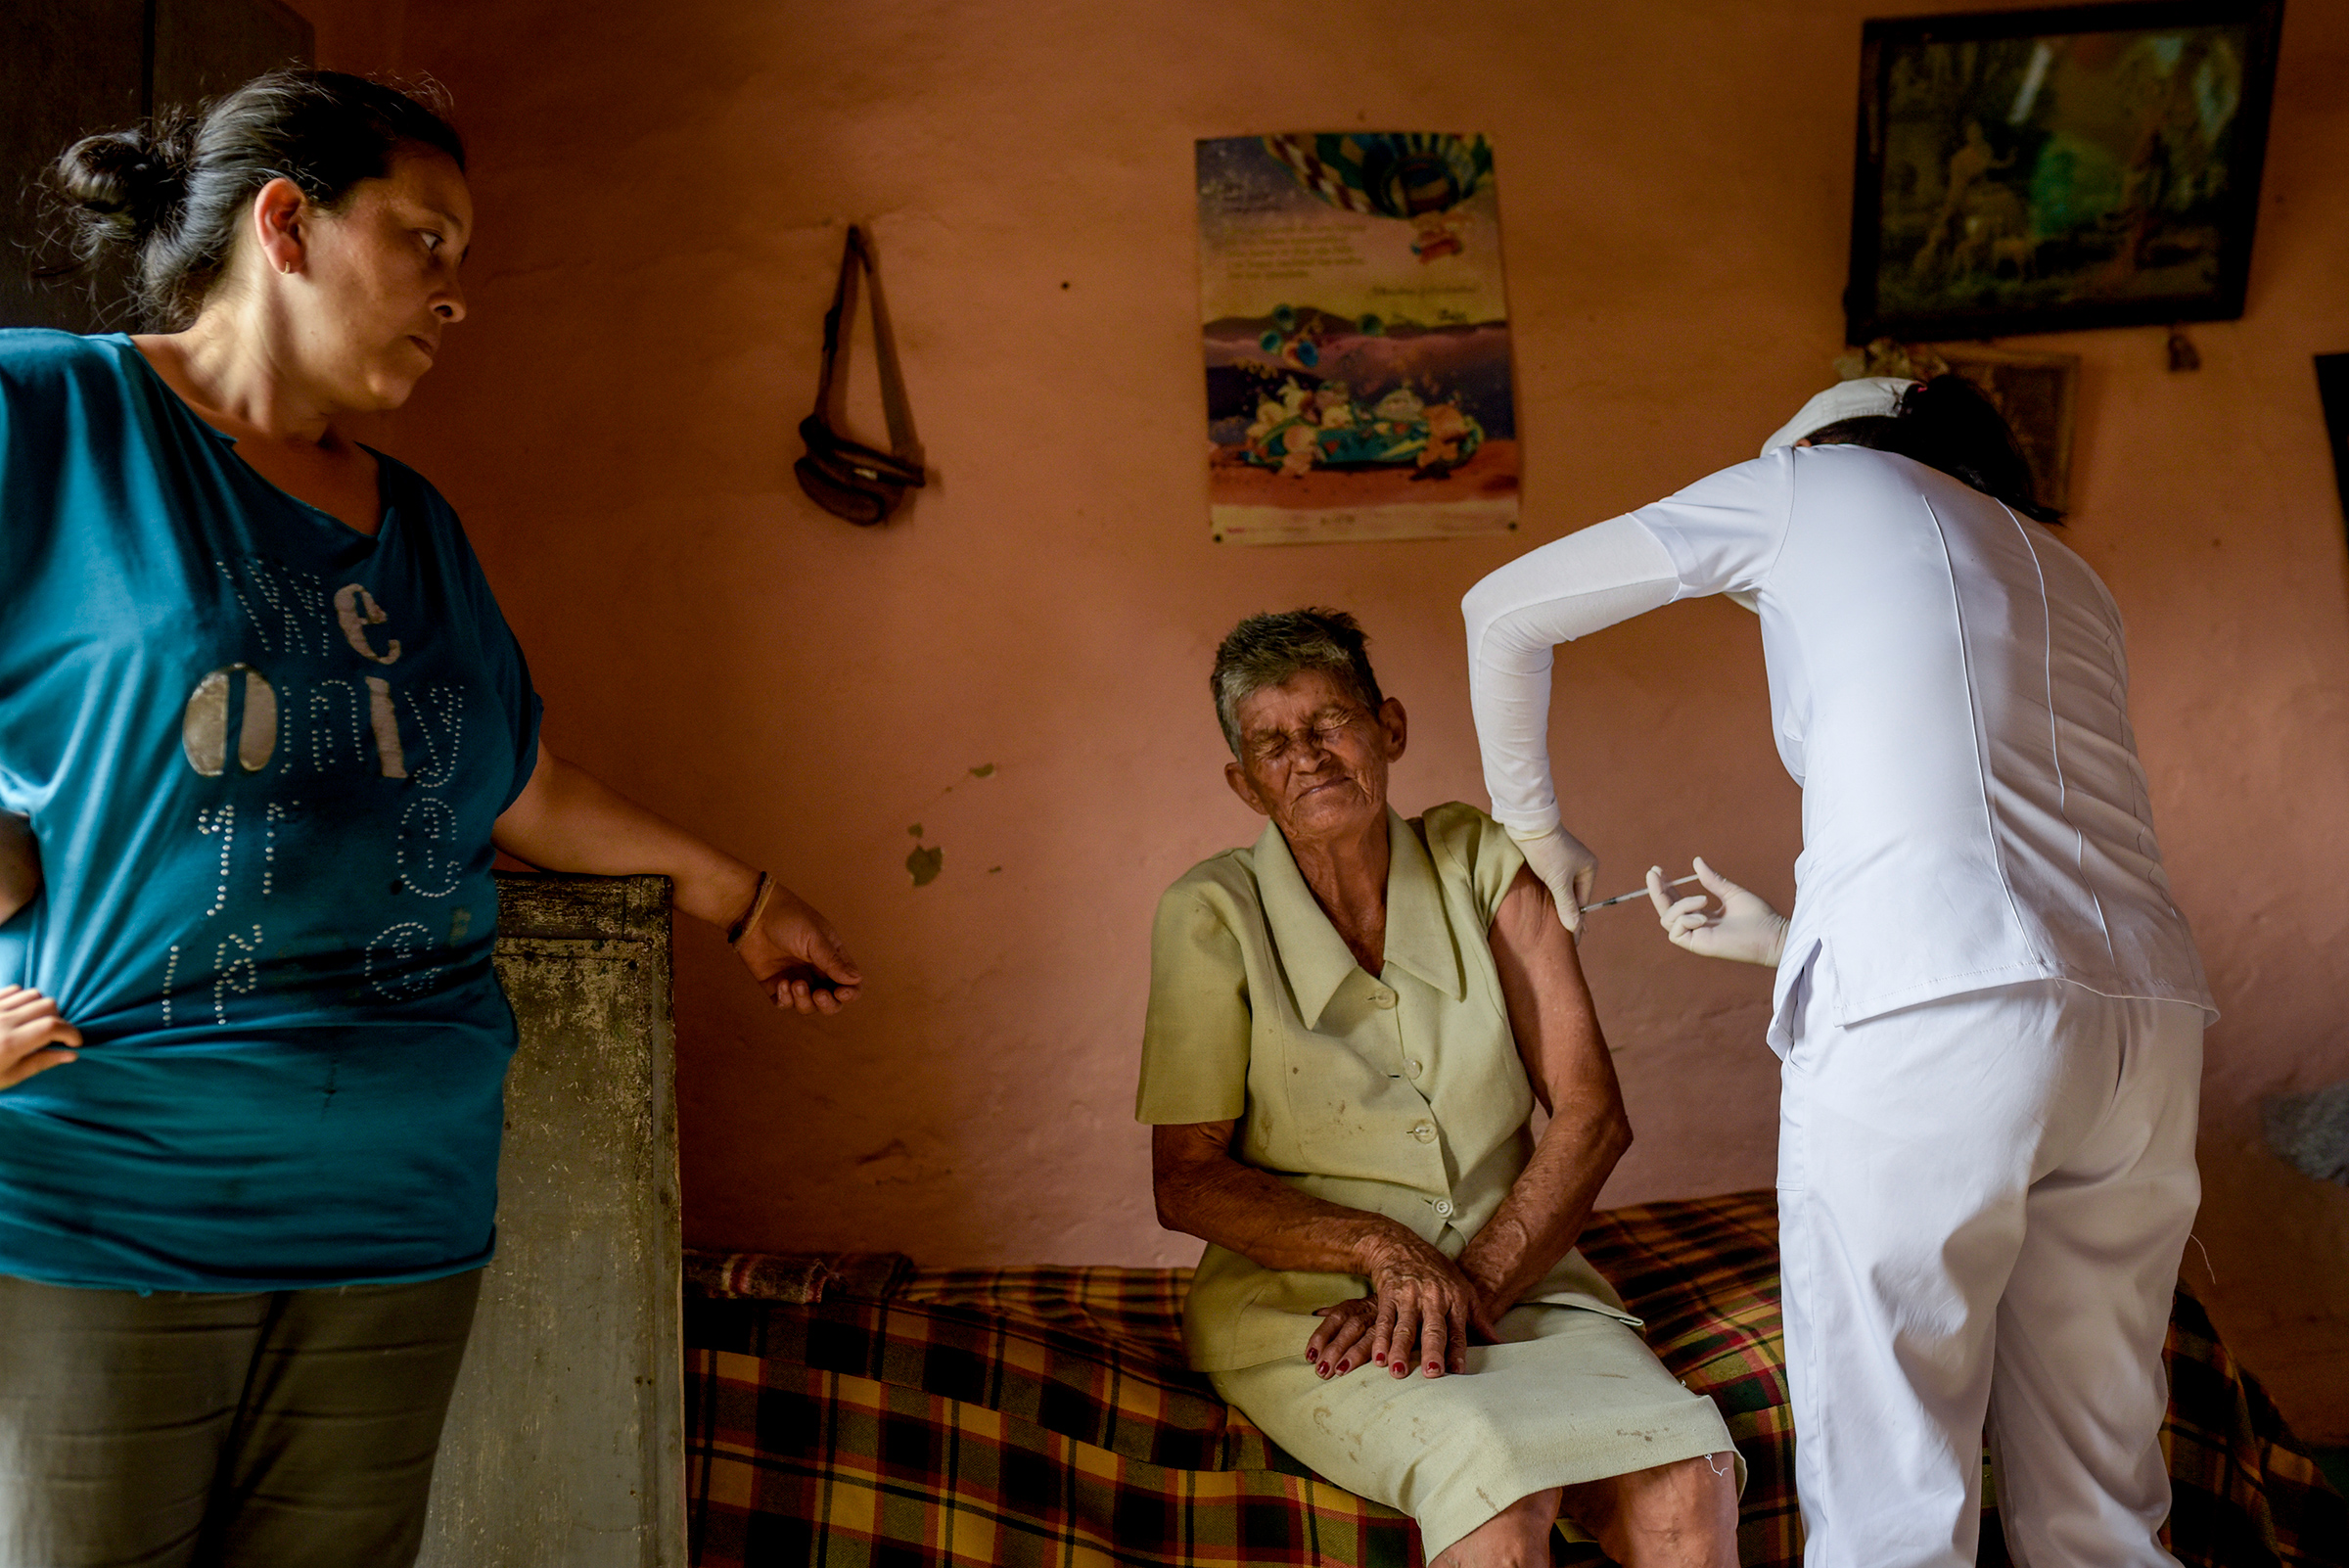 Saturia Campos, 80, receives a dose of the Novavax vaccine as her daughter watches in Chaguaní, Colombia, on April 8, 2021. Vaccination brigades made their way into inhospitable rural areas to administer COVID-19 vaccines to senior citizens. Depending on the distances and difficulty of access, each brigade vaccinates between 12 and 18 people per day. (Mariano Vimos—Getty Images)